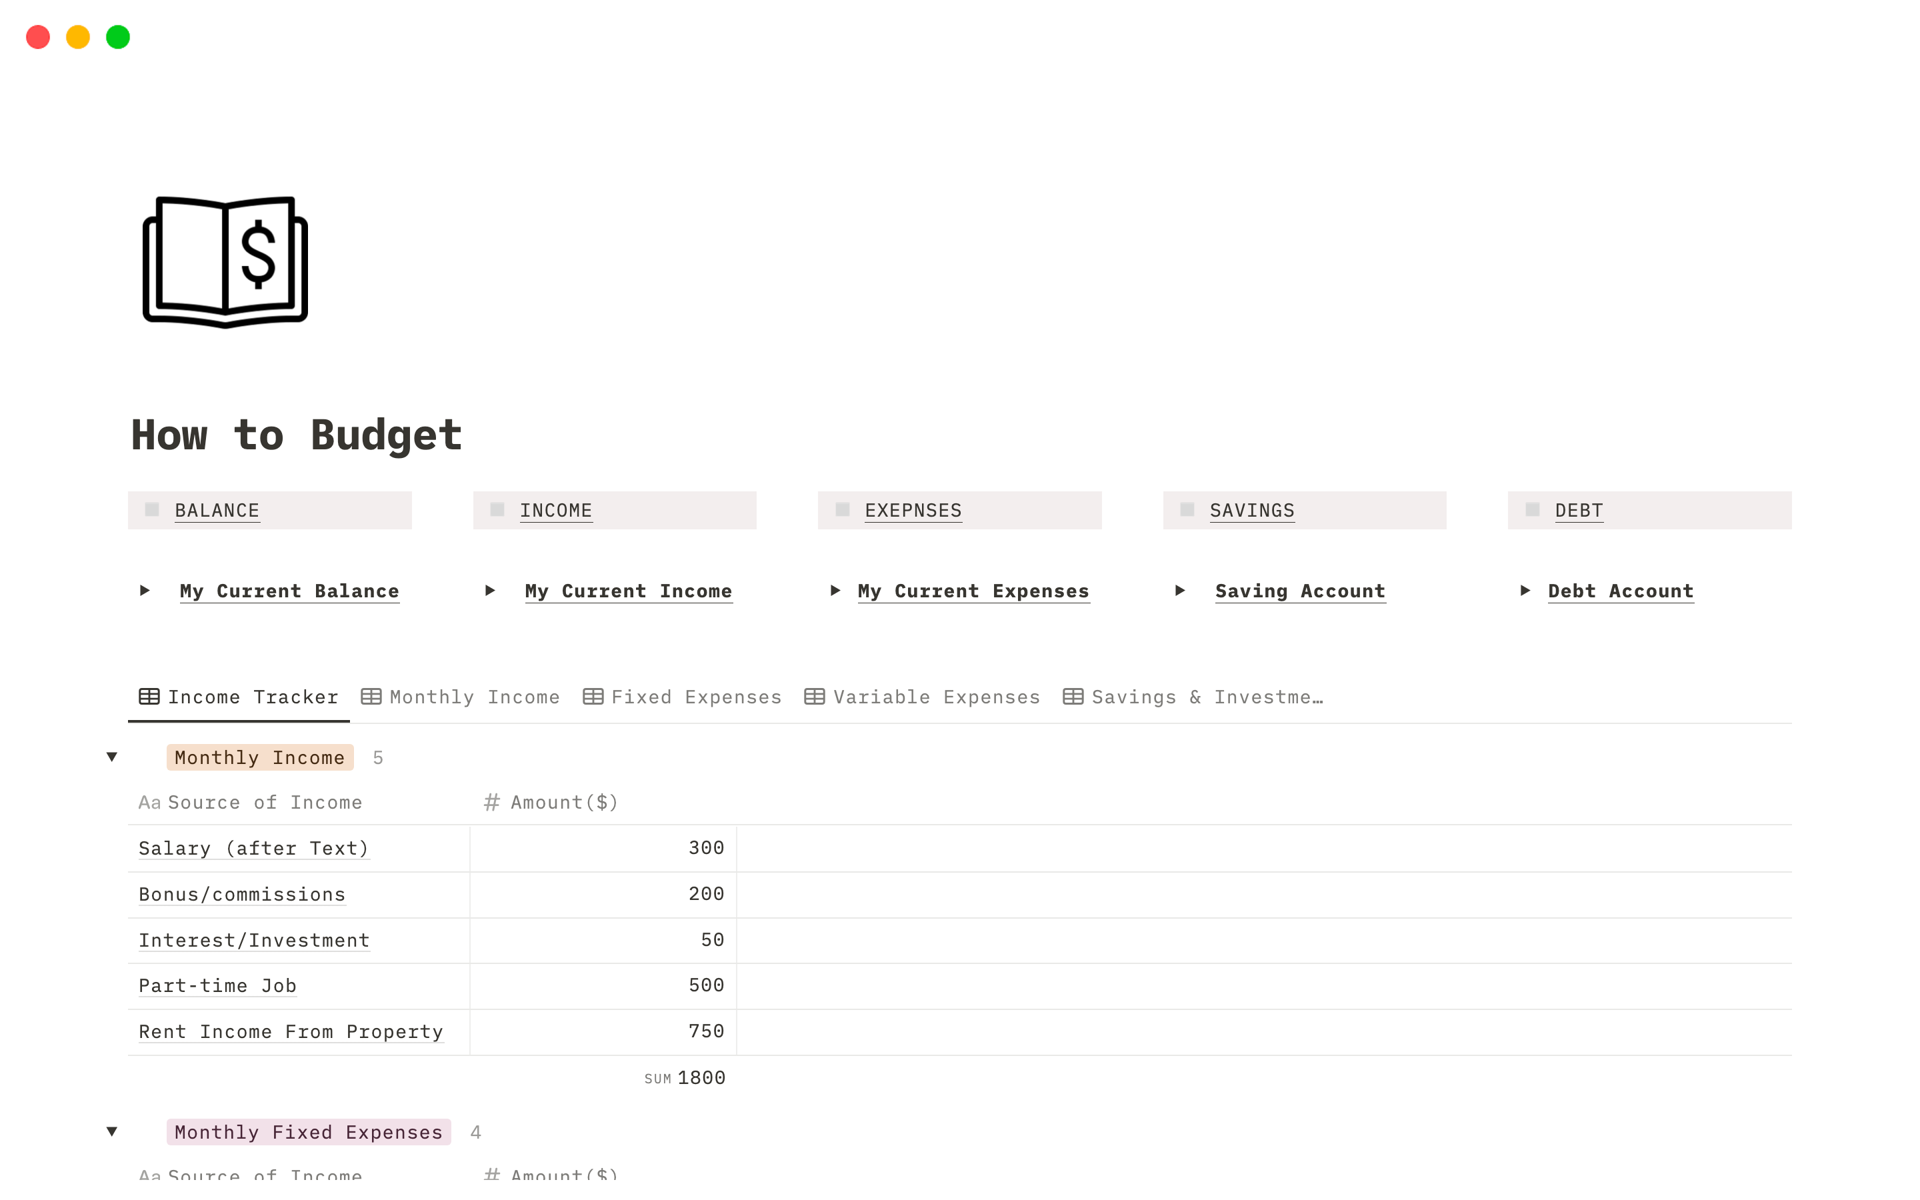 This 'How to Budget' template is a handy financial companion that can be used by anyone looking to gain better control over their money.